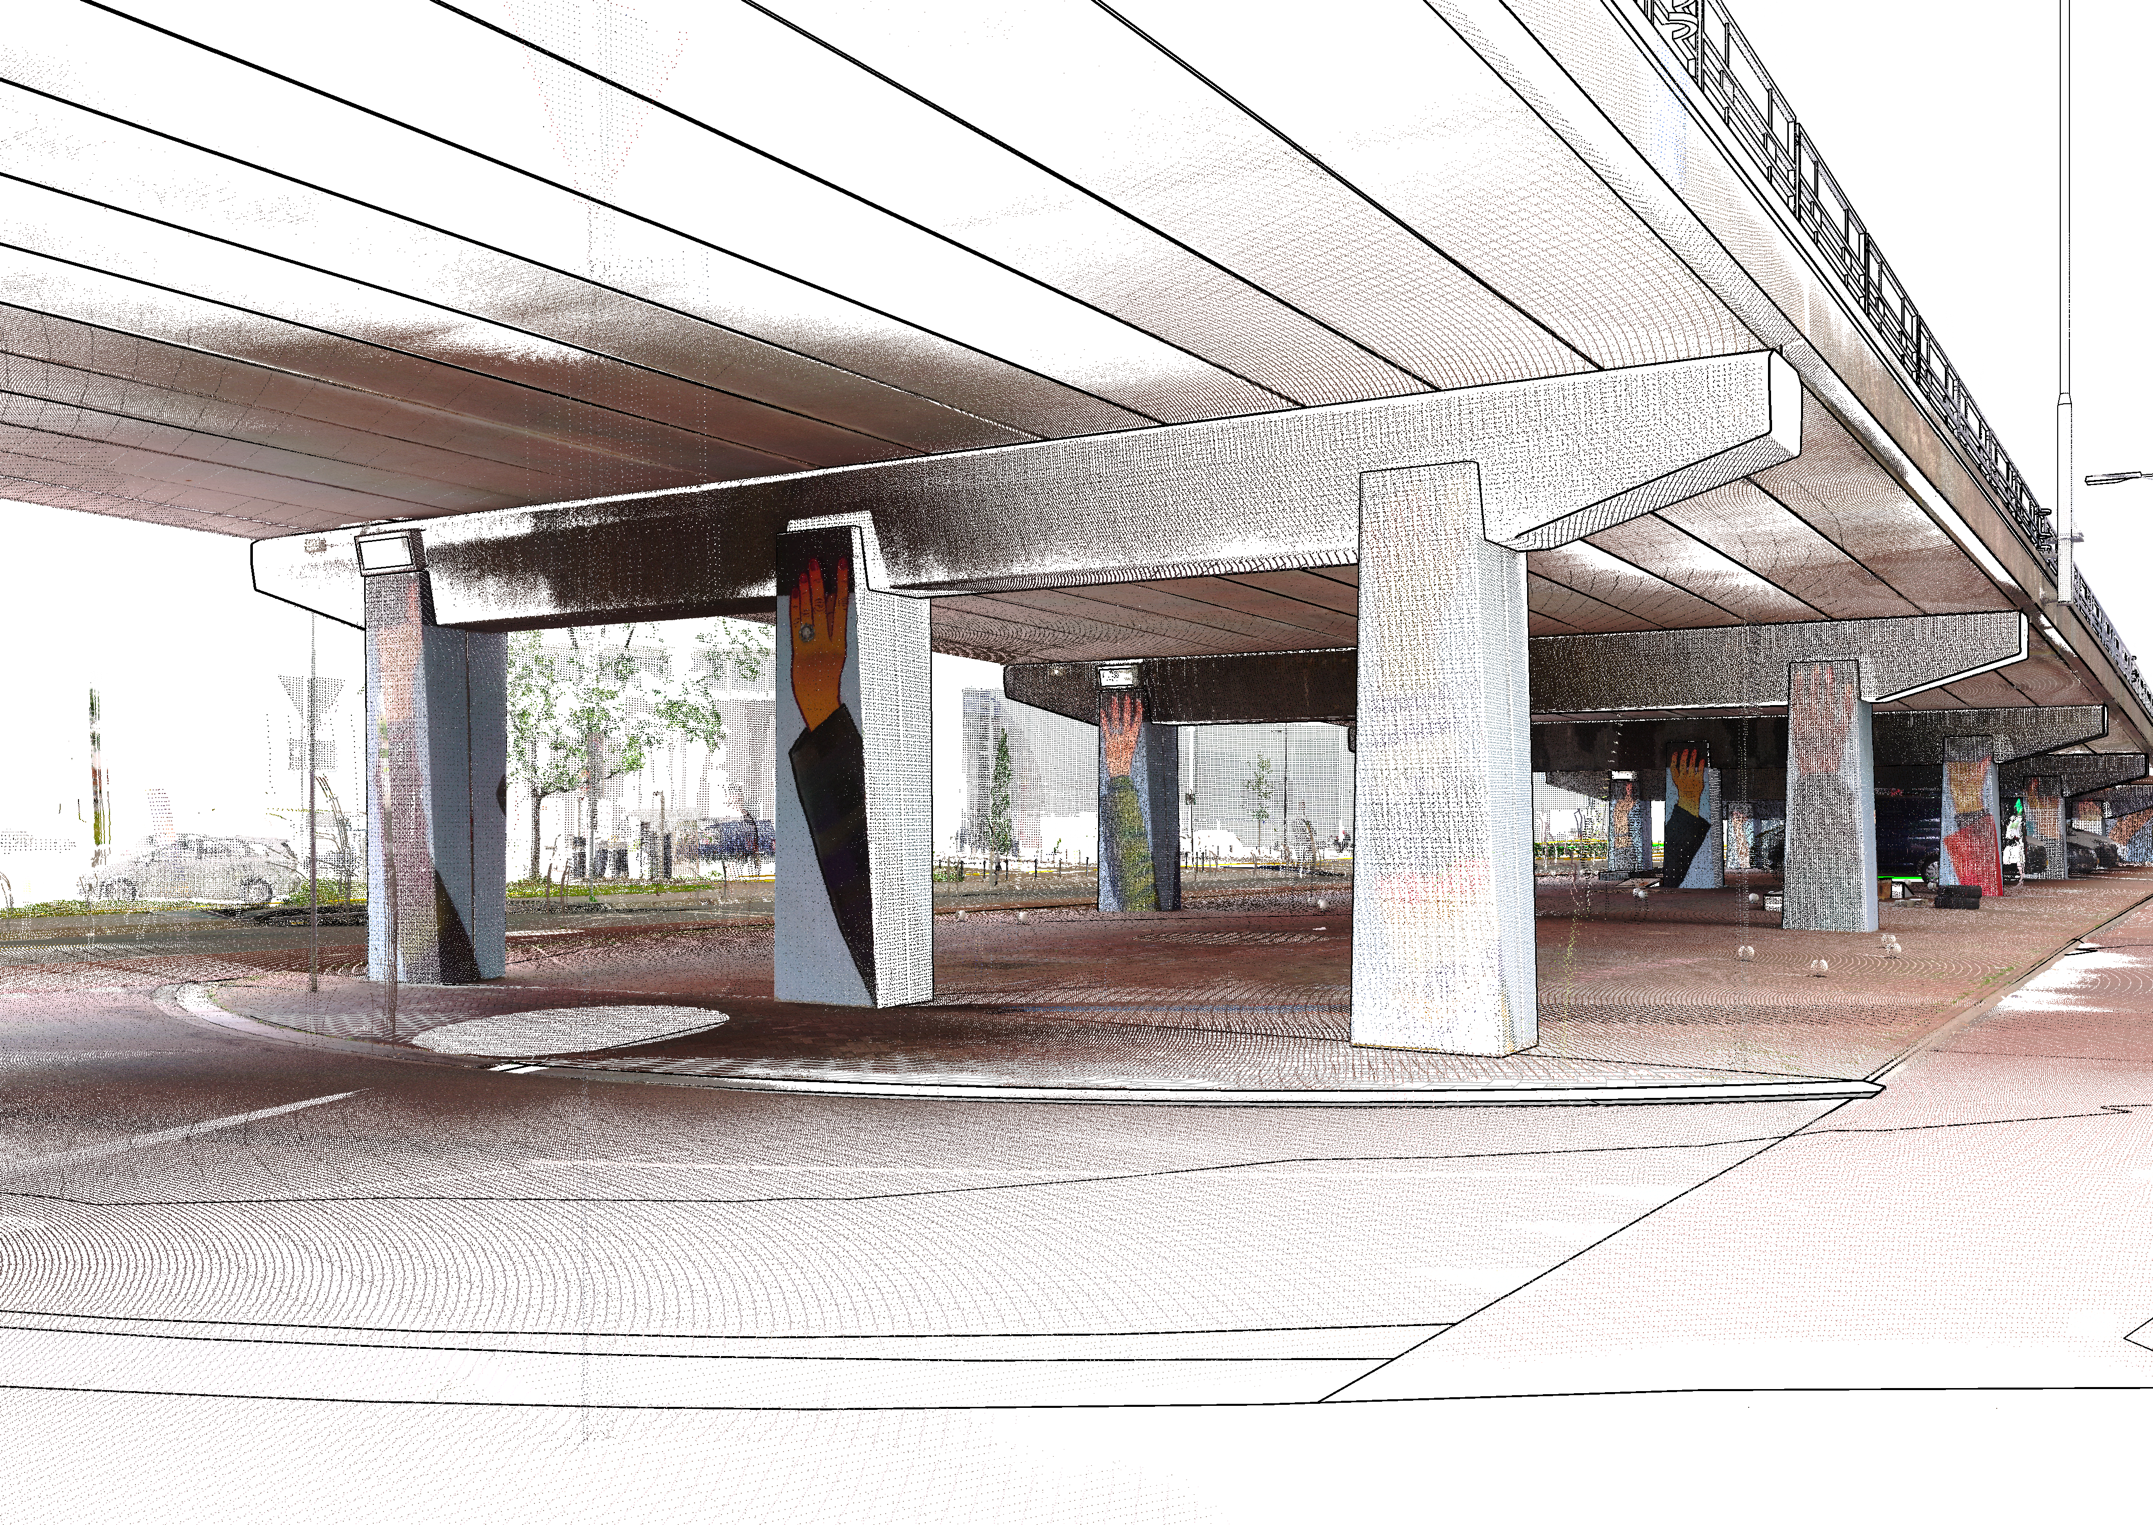 Applications of 3D Laser Scanning in Civil Engineering